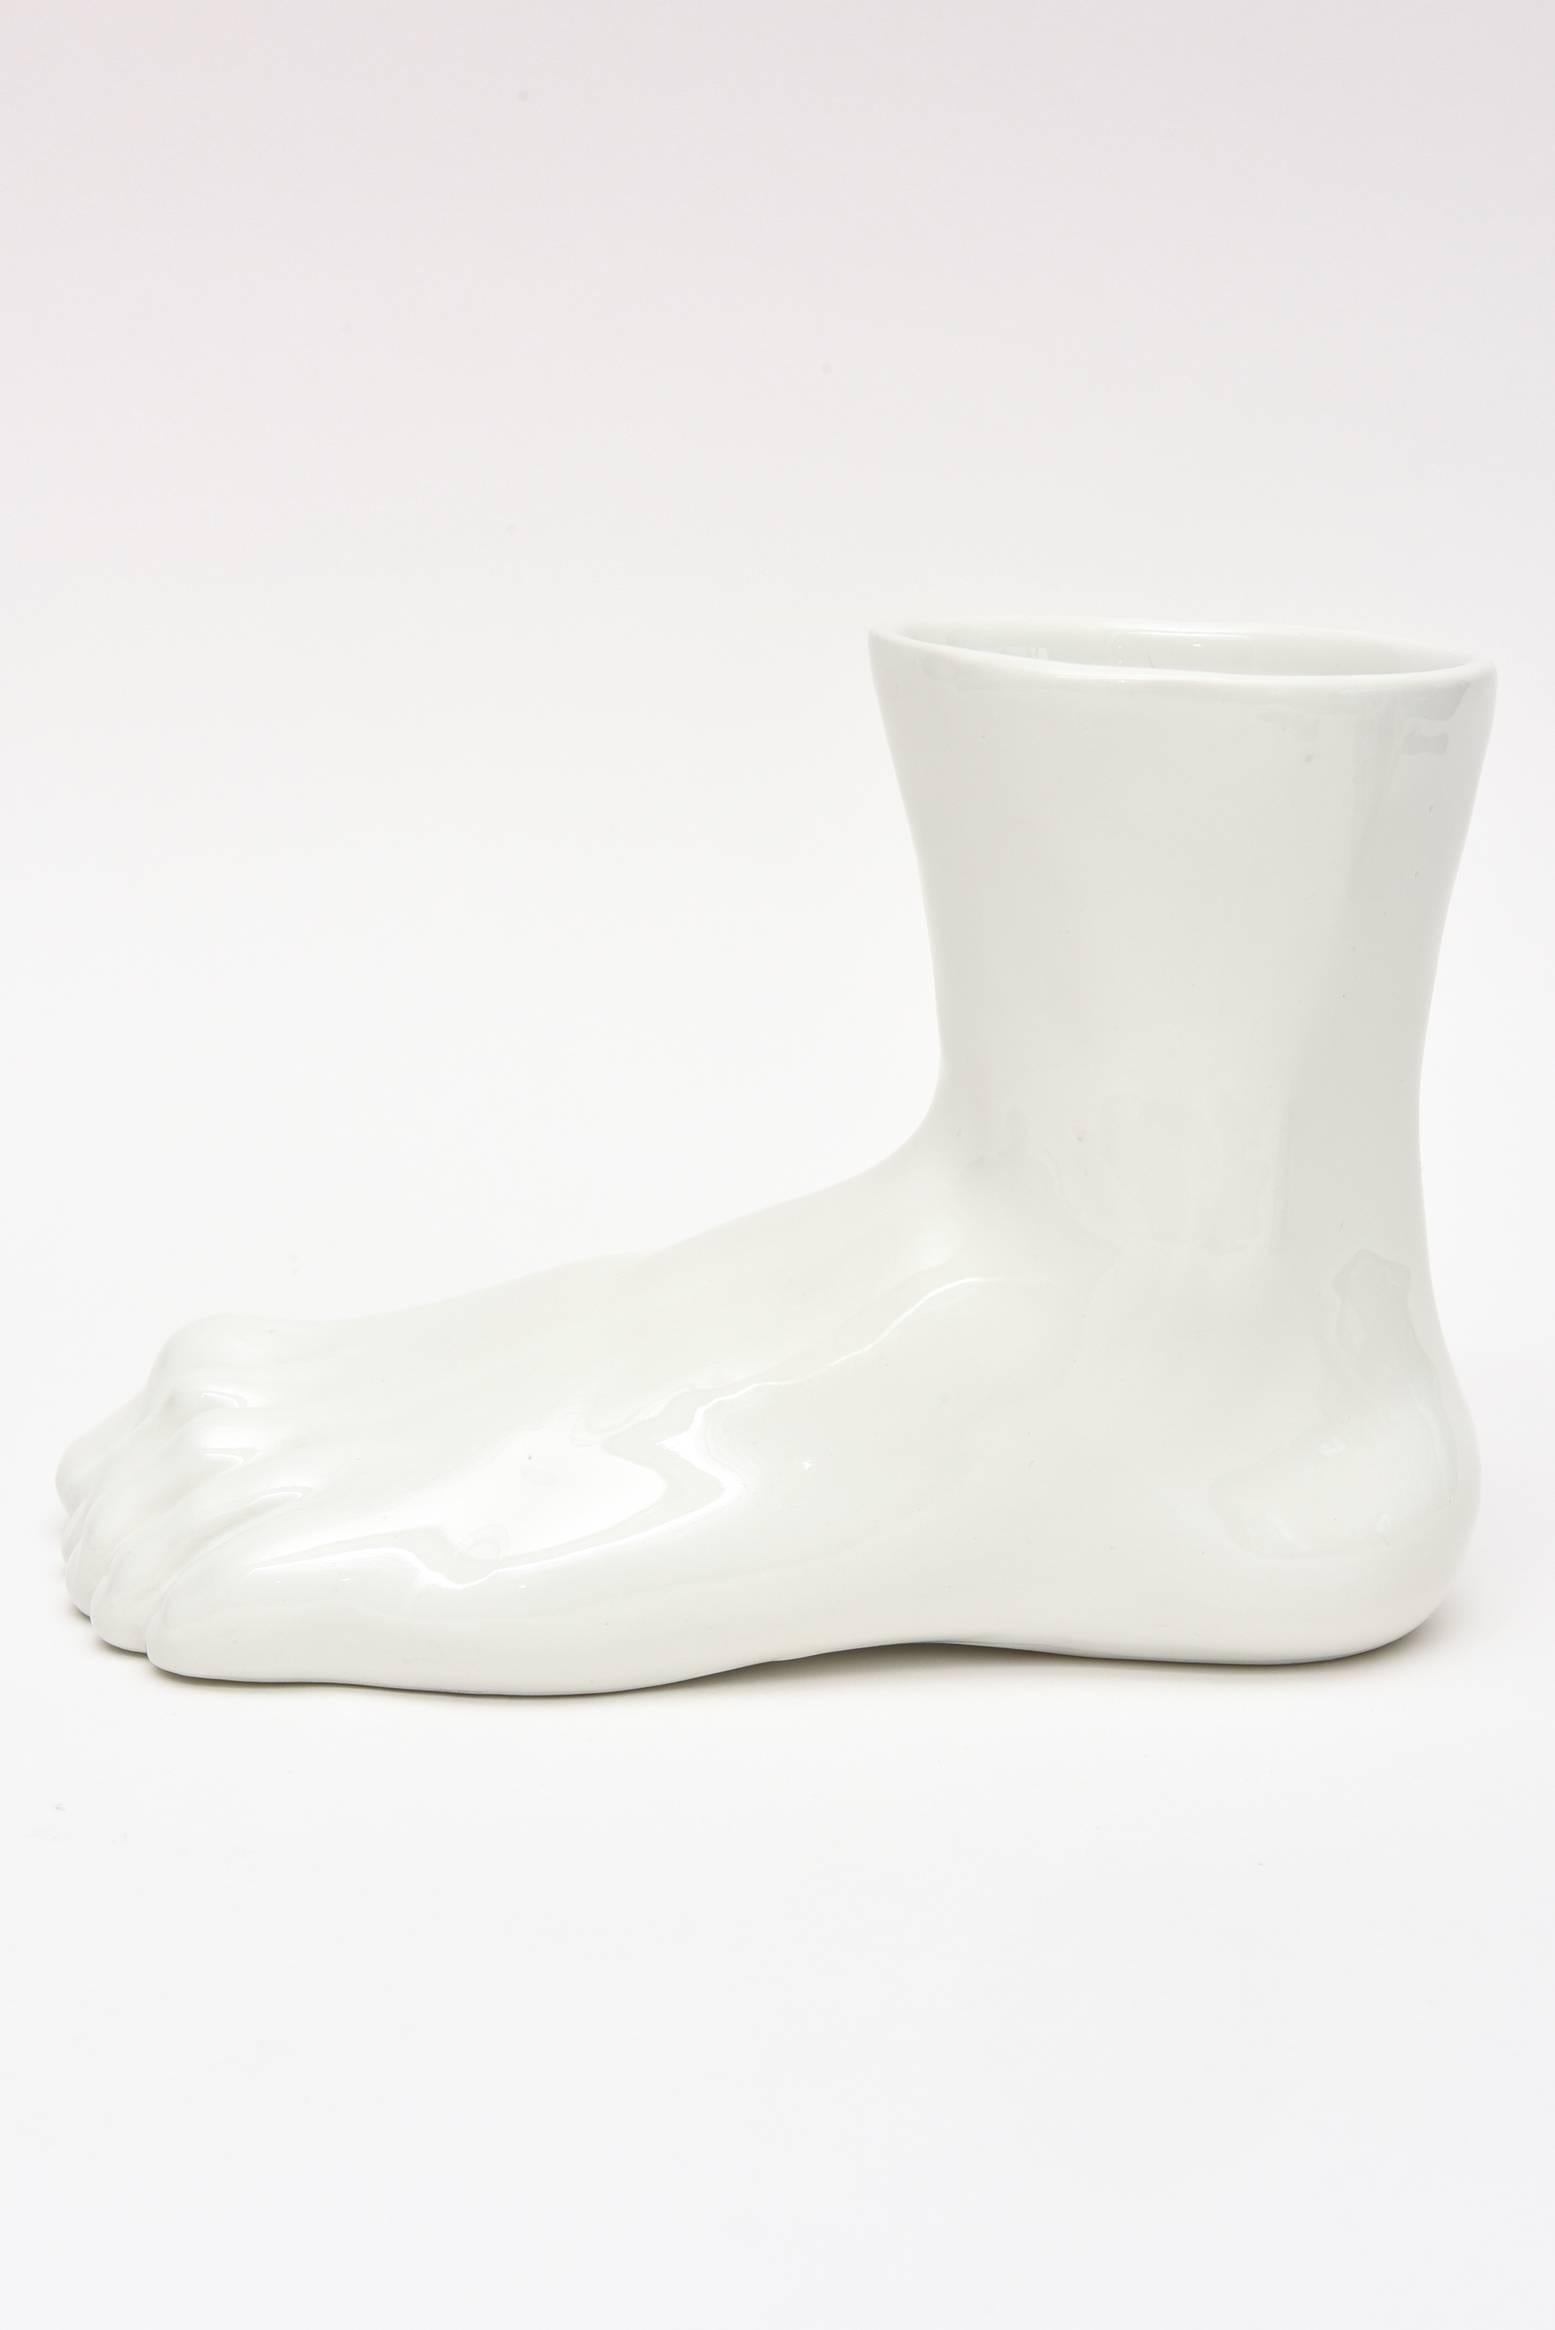 vase with a foot